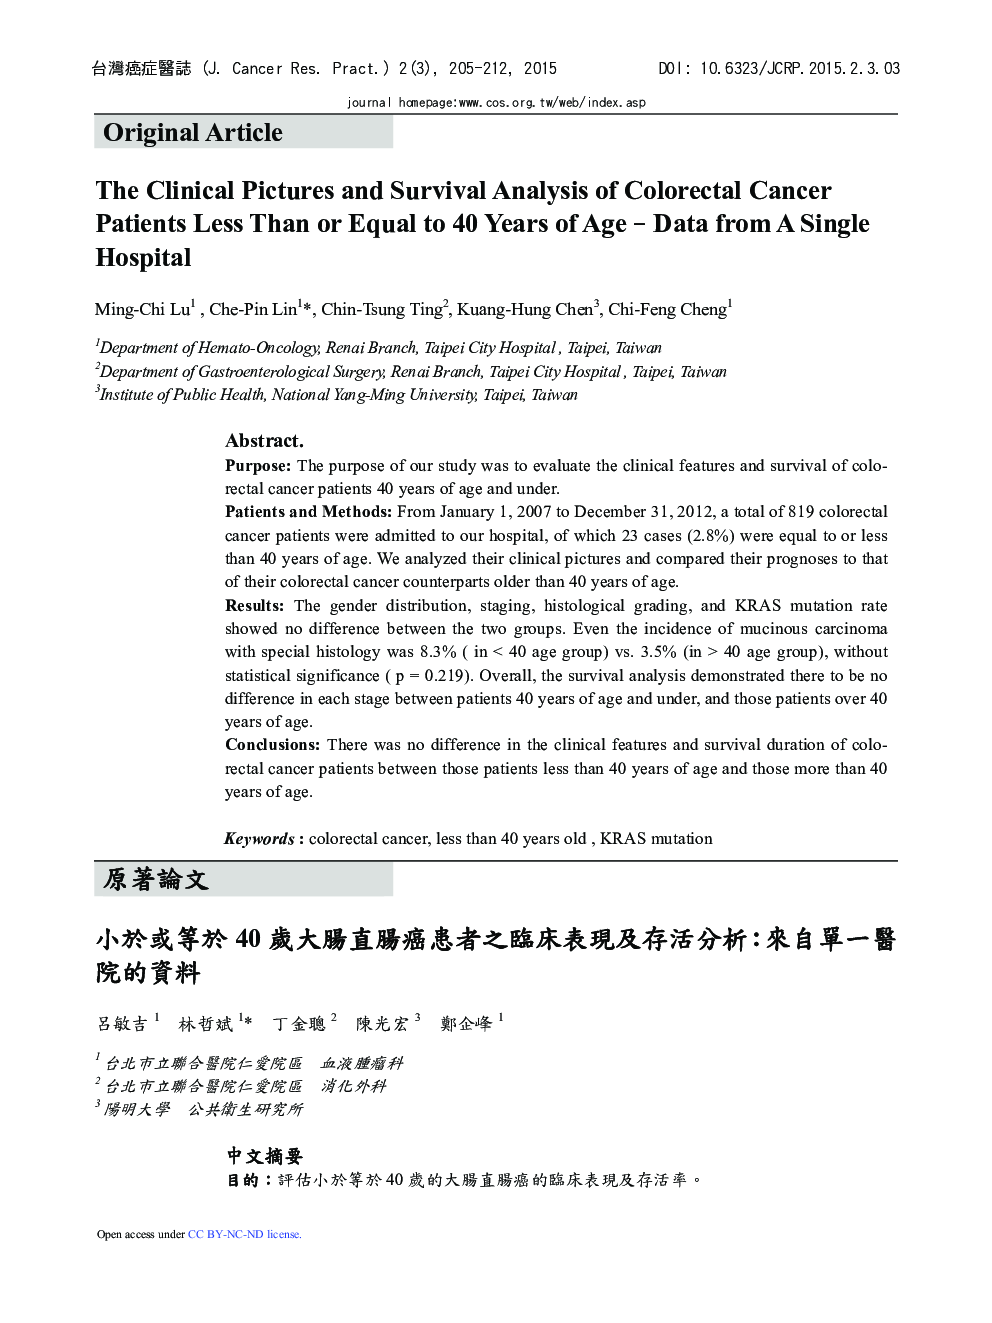 The Clinical Pictures and Survival Analysis of Colorectal Cancer Patients Less Than or Equal to 40 Years of Age – Data from A Single Hospital